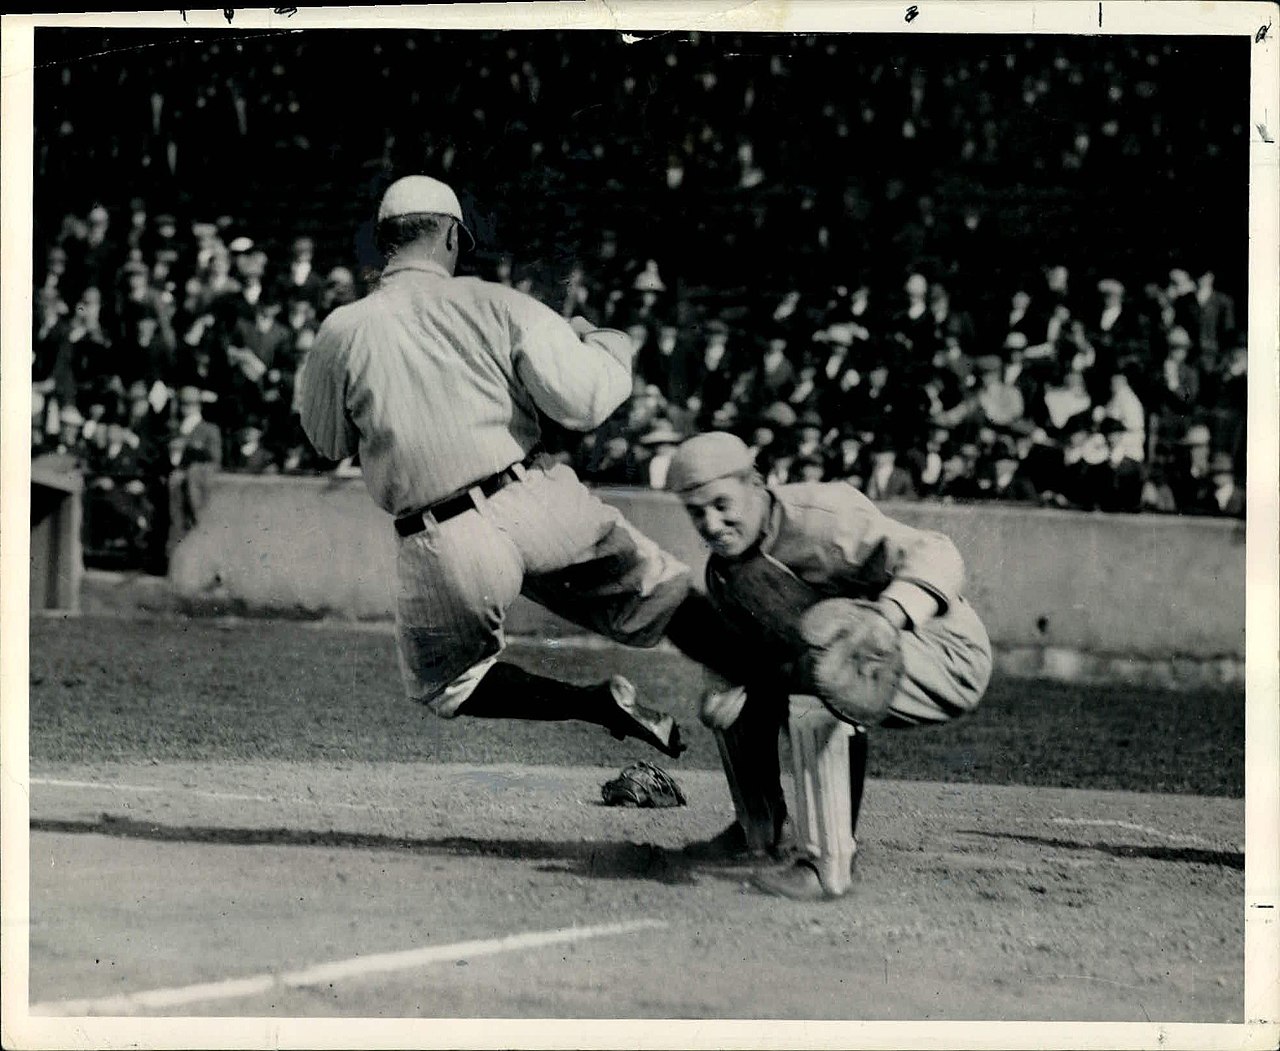 Cobb violently crashing into St. Louis Browns catcher Paul Krichell in 1912 to make him drop the ball.